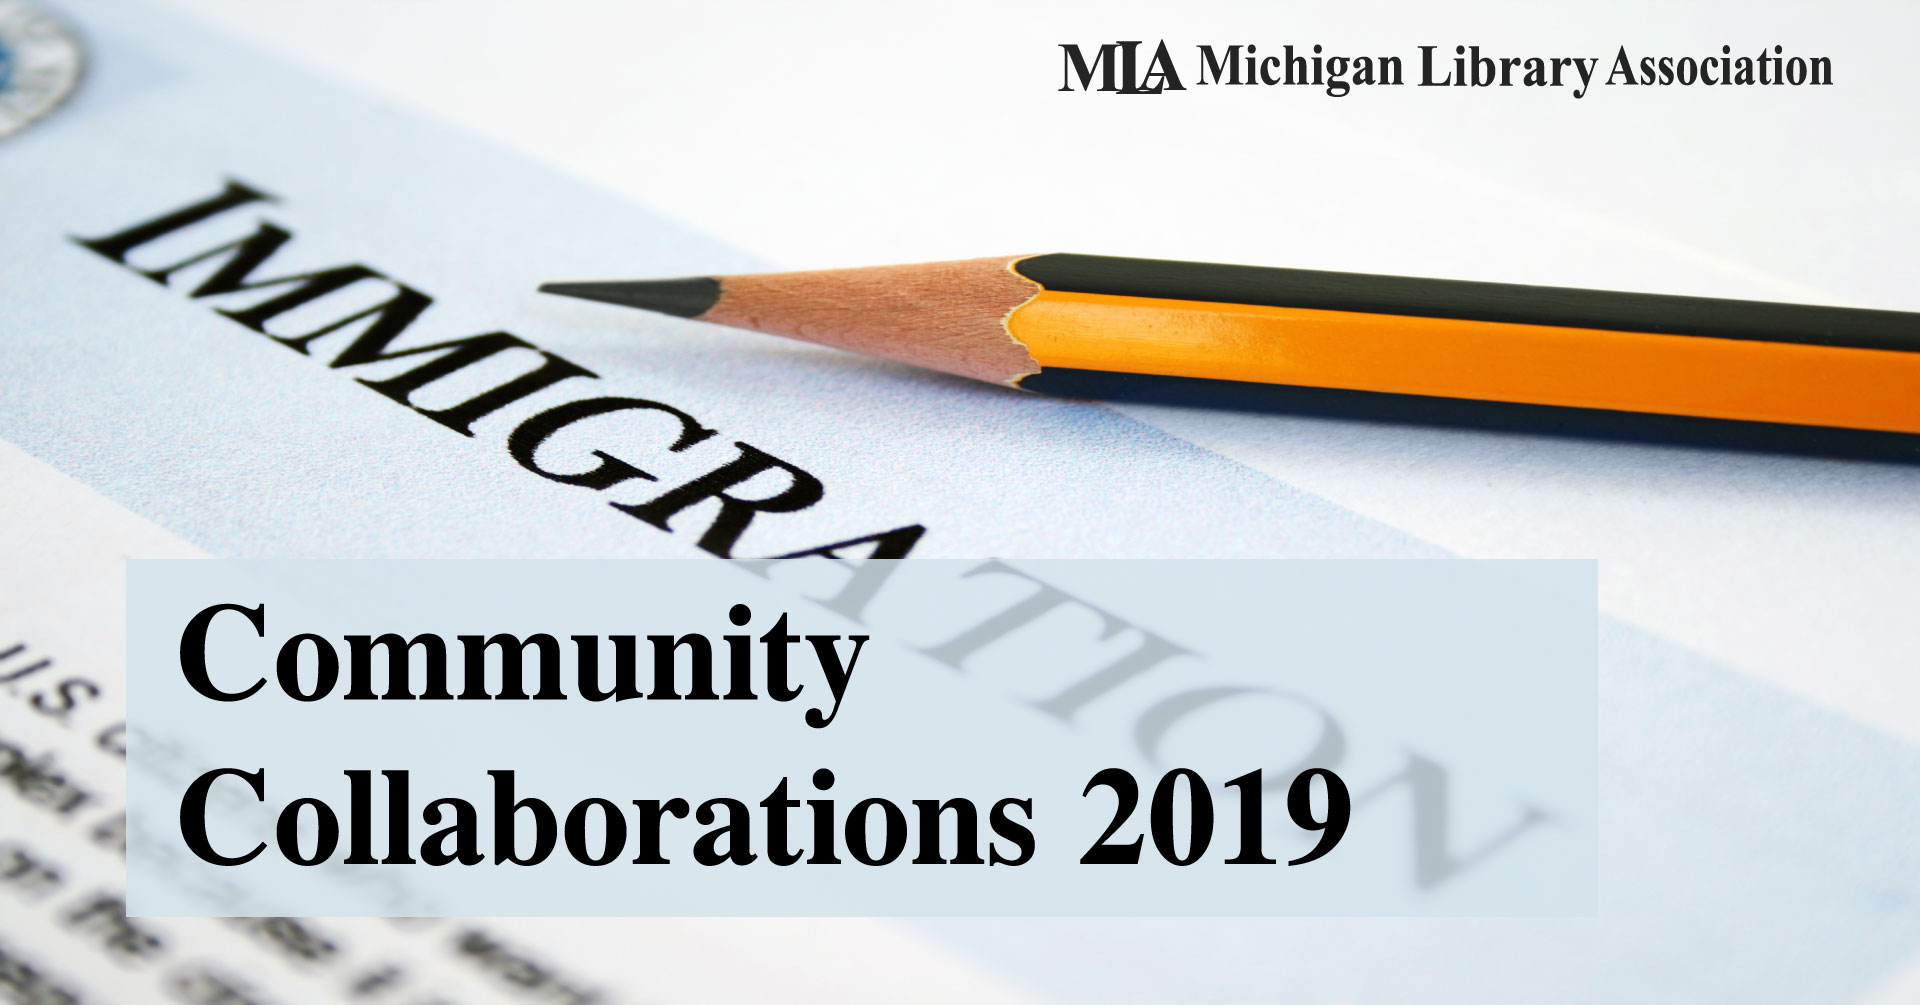 Community Collaborations 2019 Event image